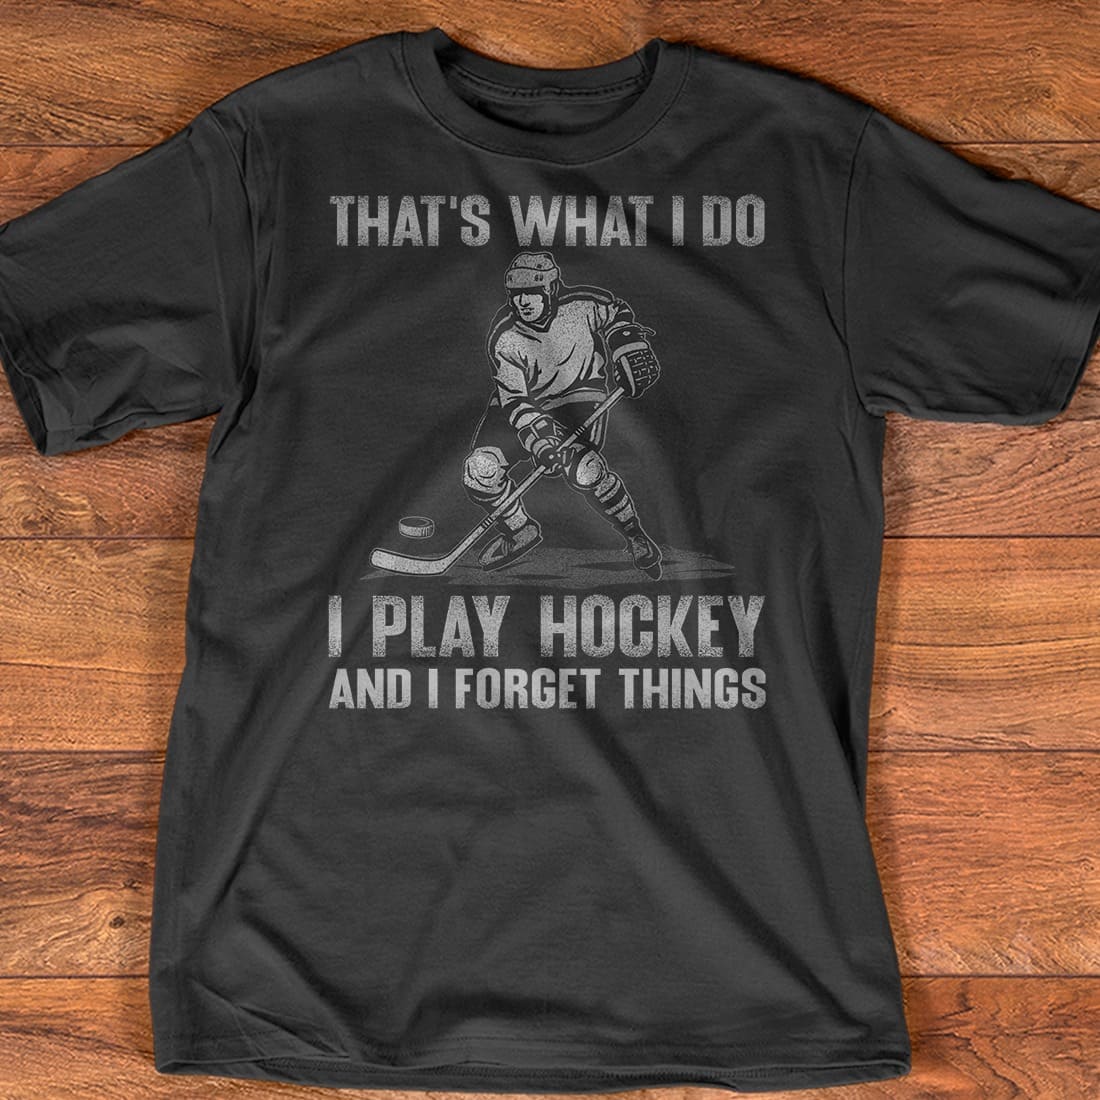 That's what I do I play hockey and I forget things - Gift for hockey player, ice hockey sport